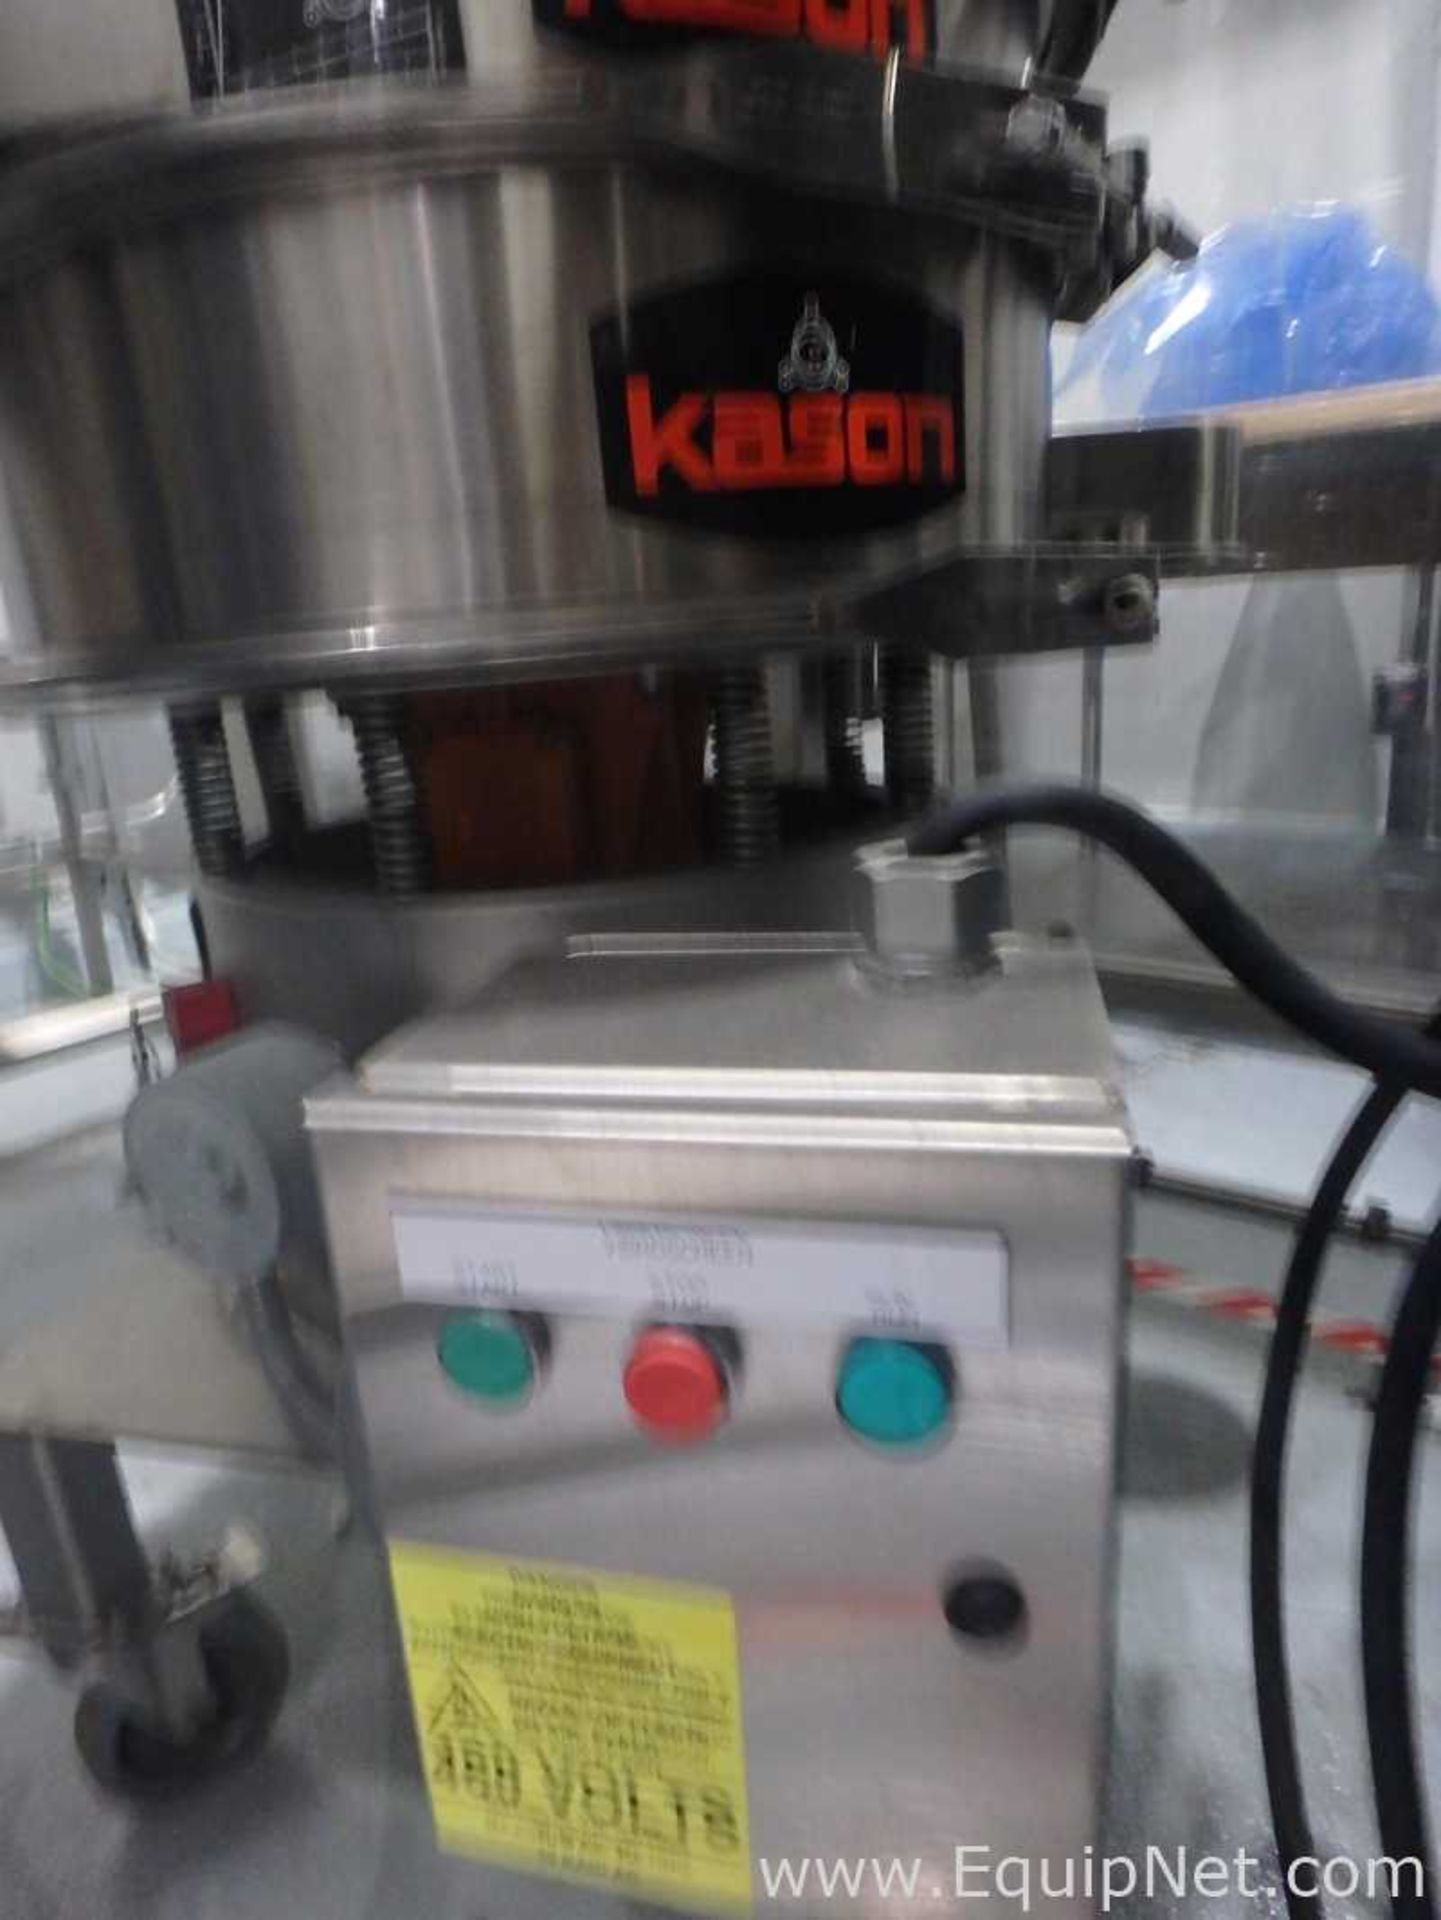 Kason Stainless Steel Separator Sifter - Image 4 of 4